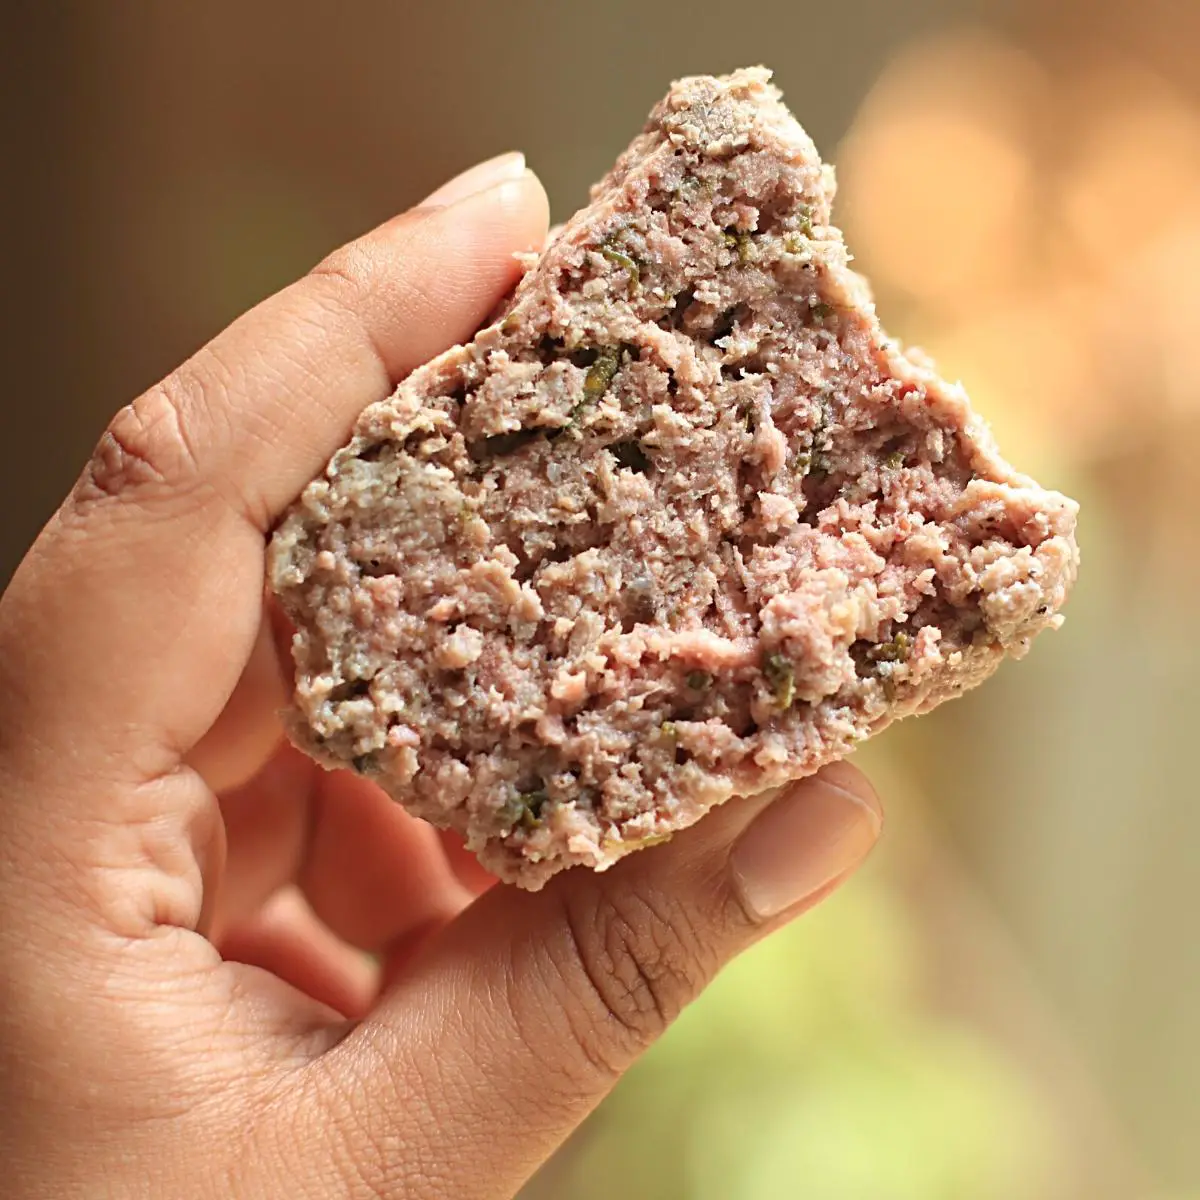 A sliced of meatloaf in a hand.